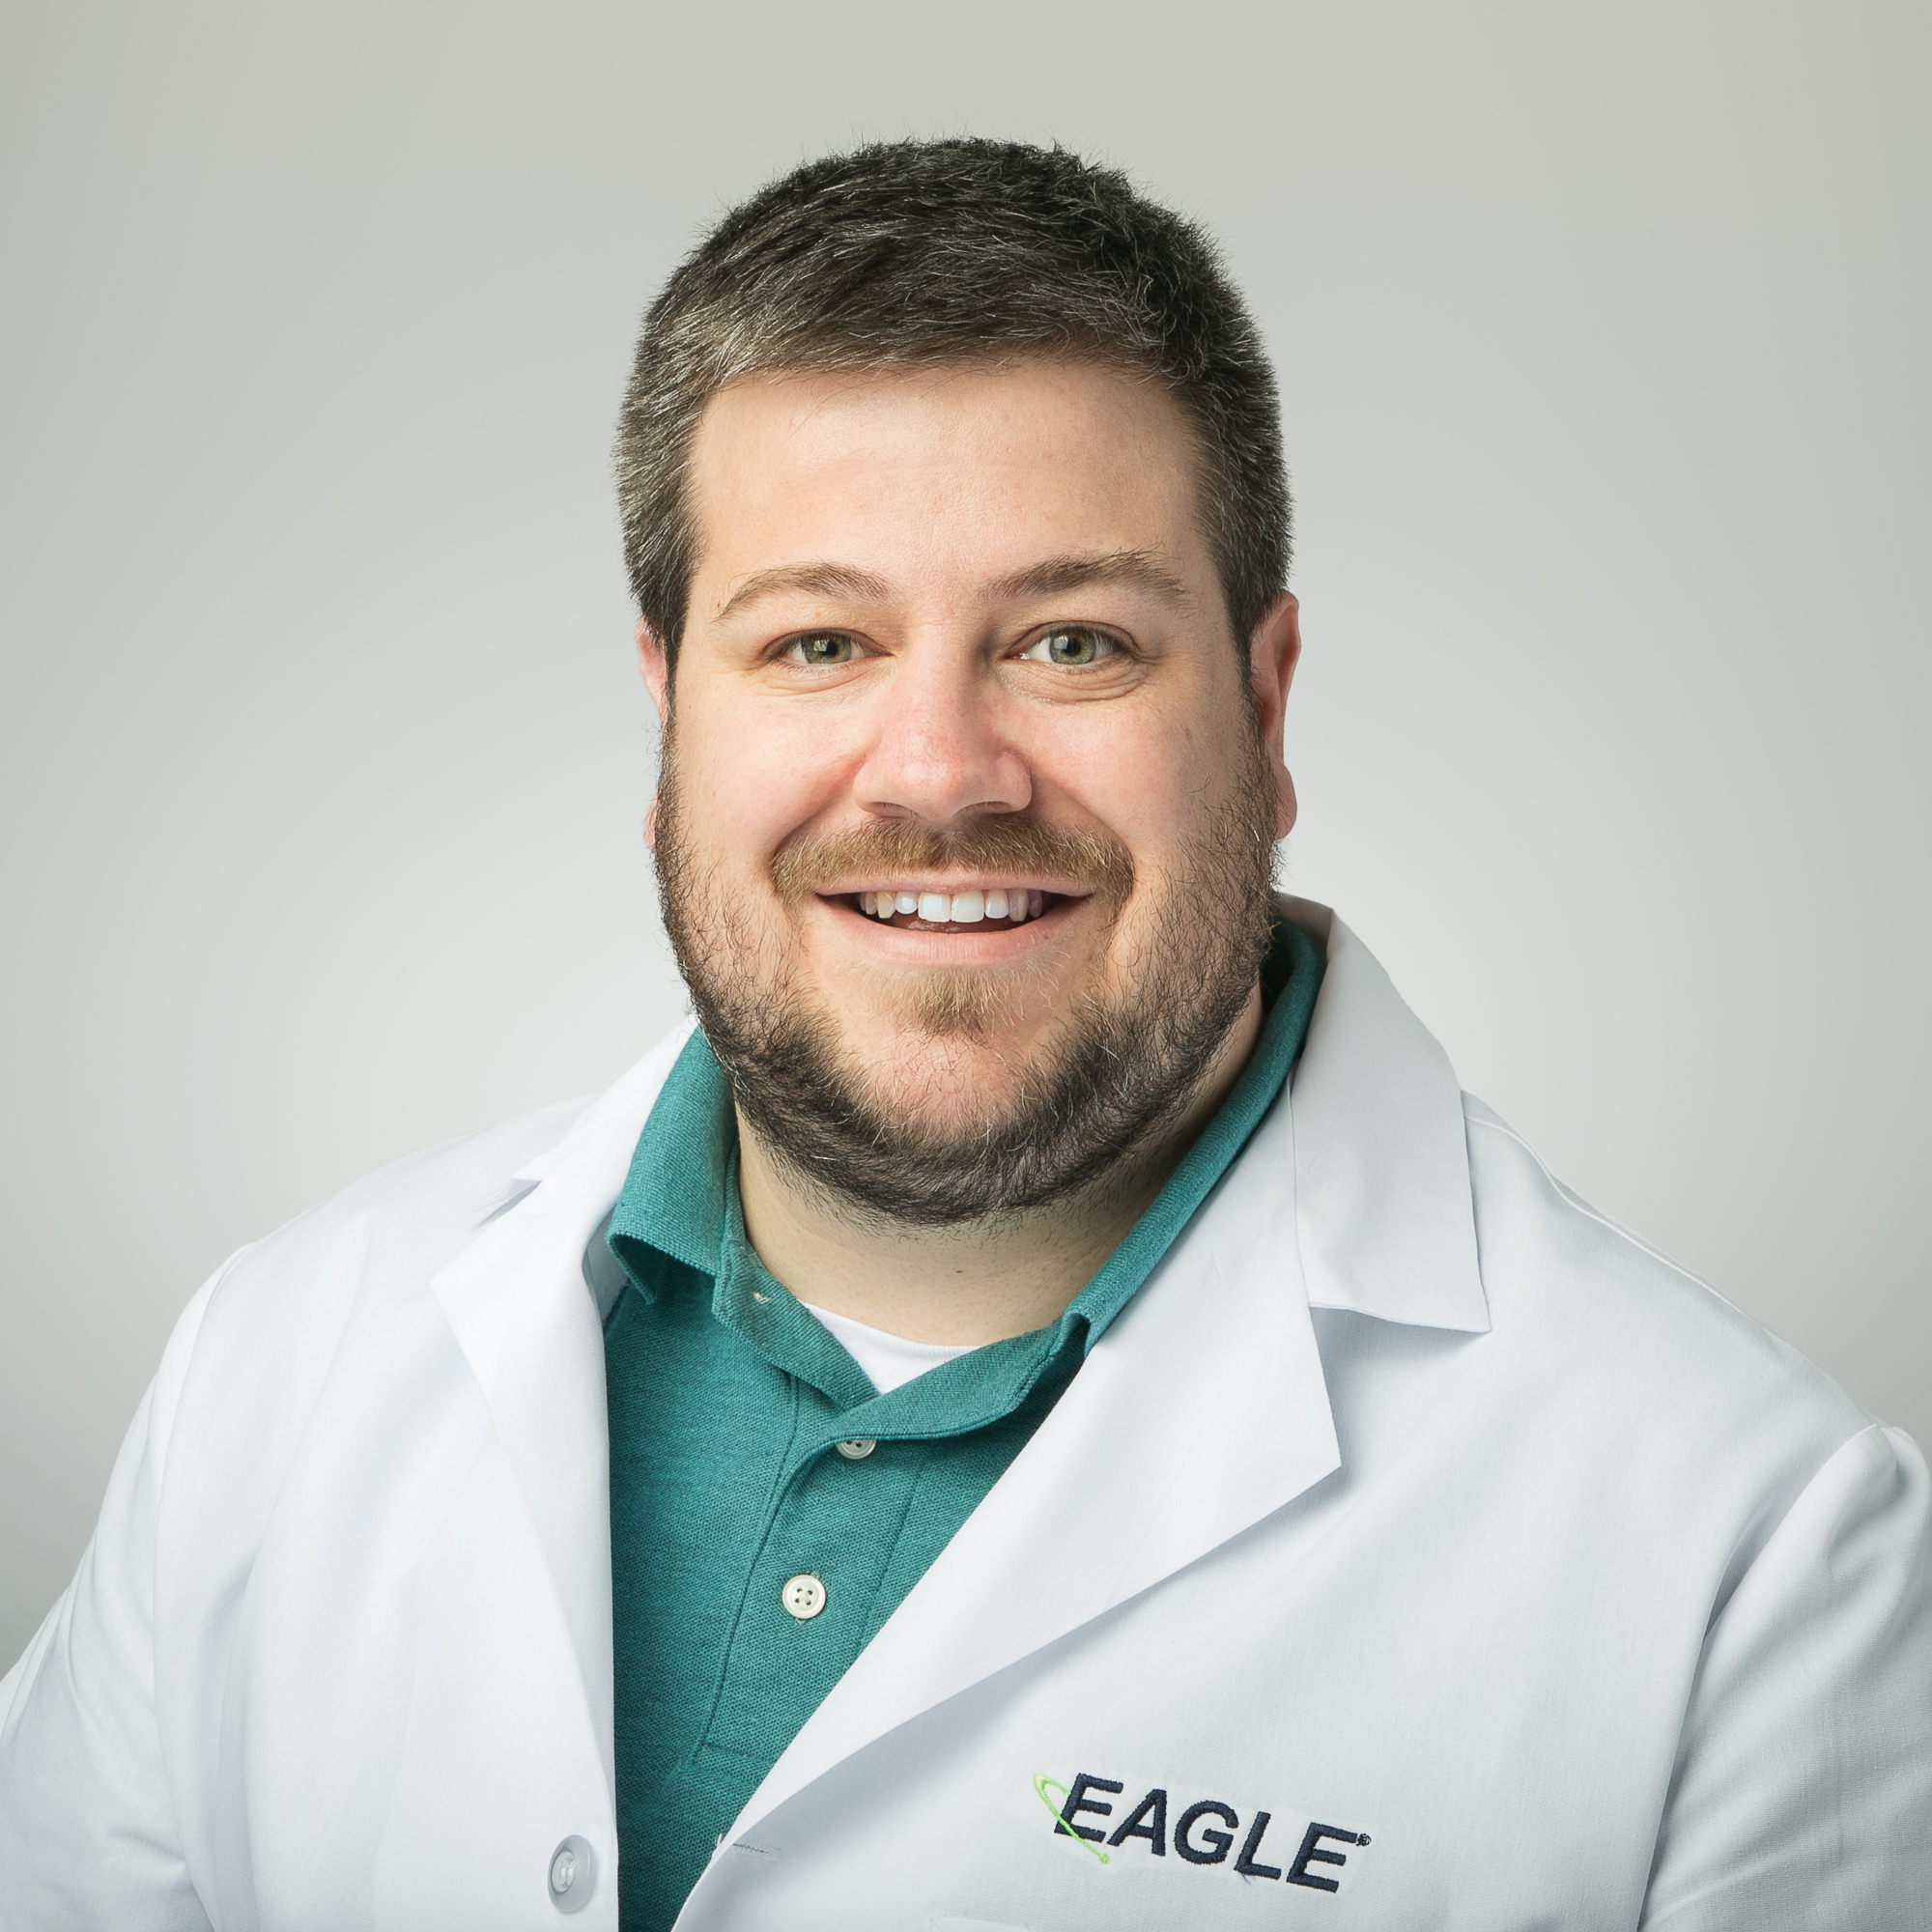 Principal Engineer Jeff Gloyer smiles while wearing a white Eagle lab coat.